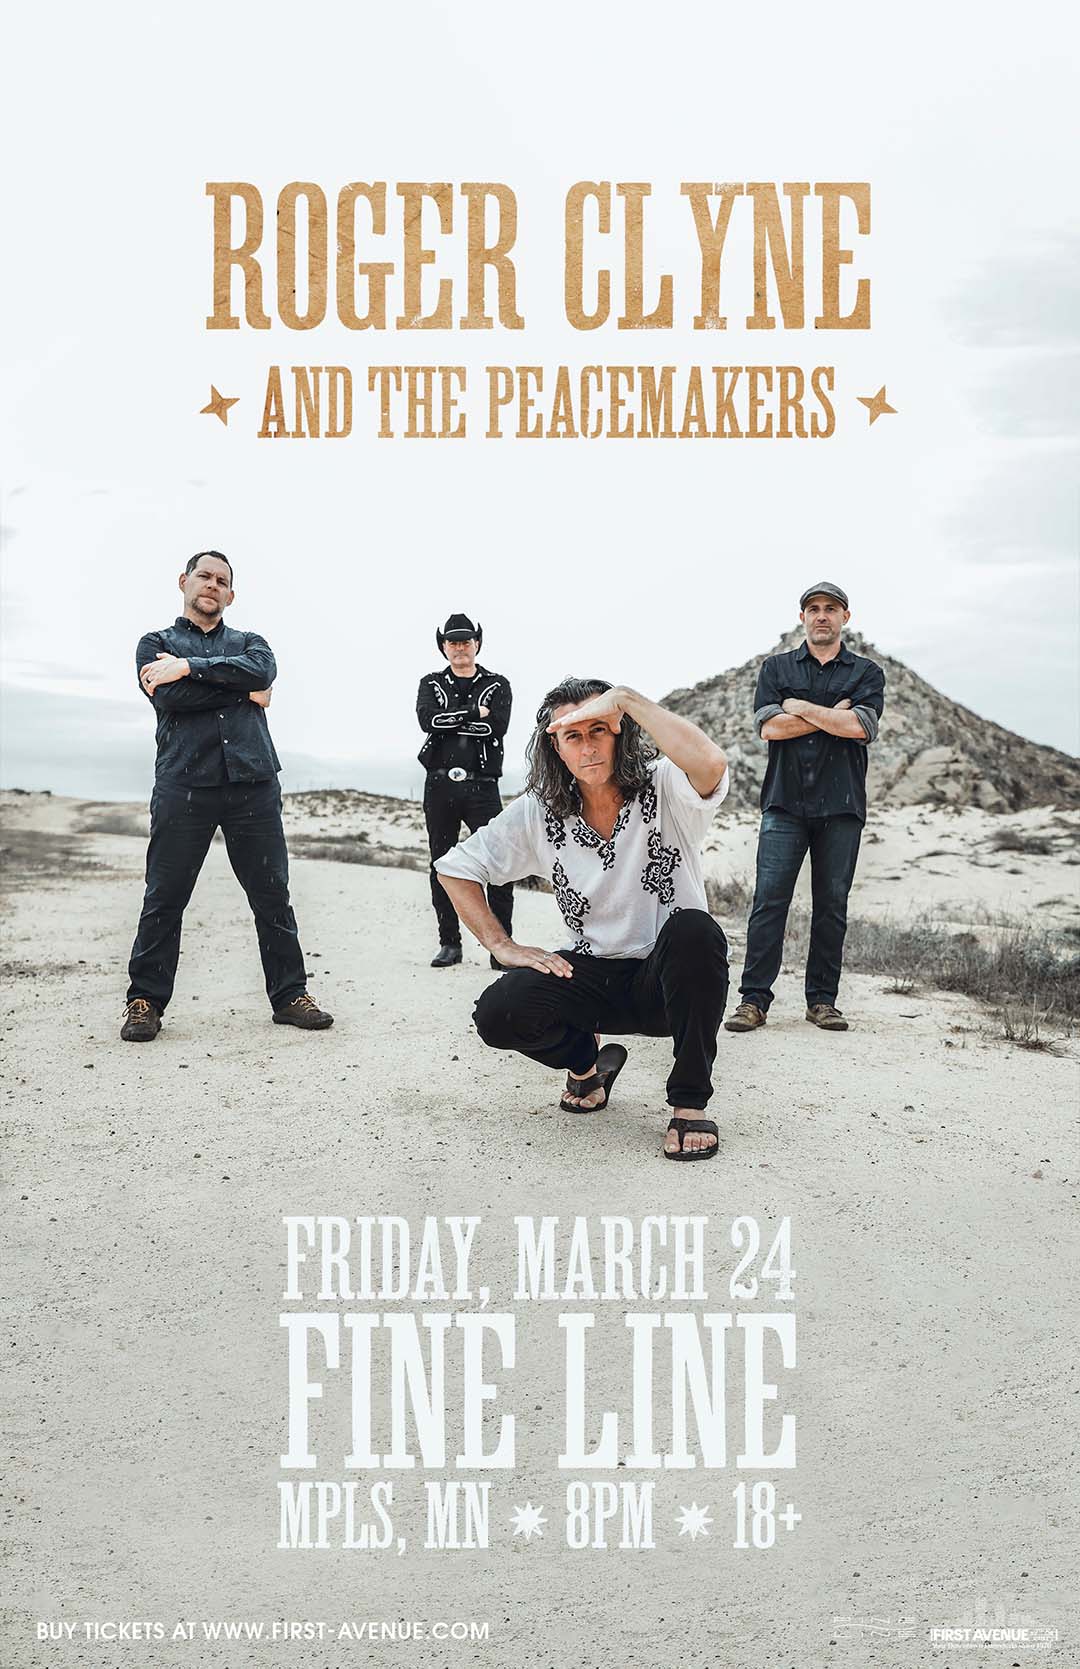 Roger Clyne & The Peacemakers ★ Fine Line First Avenue